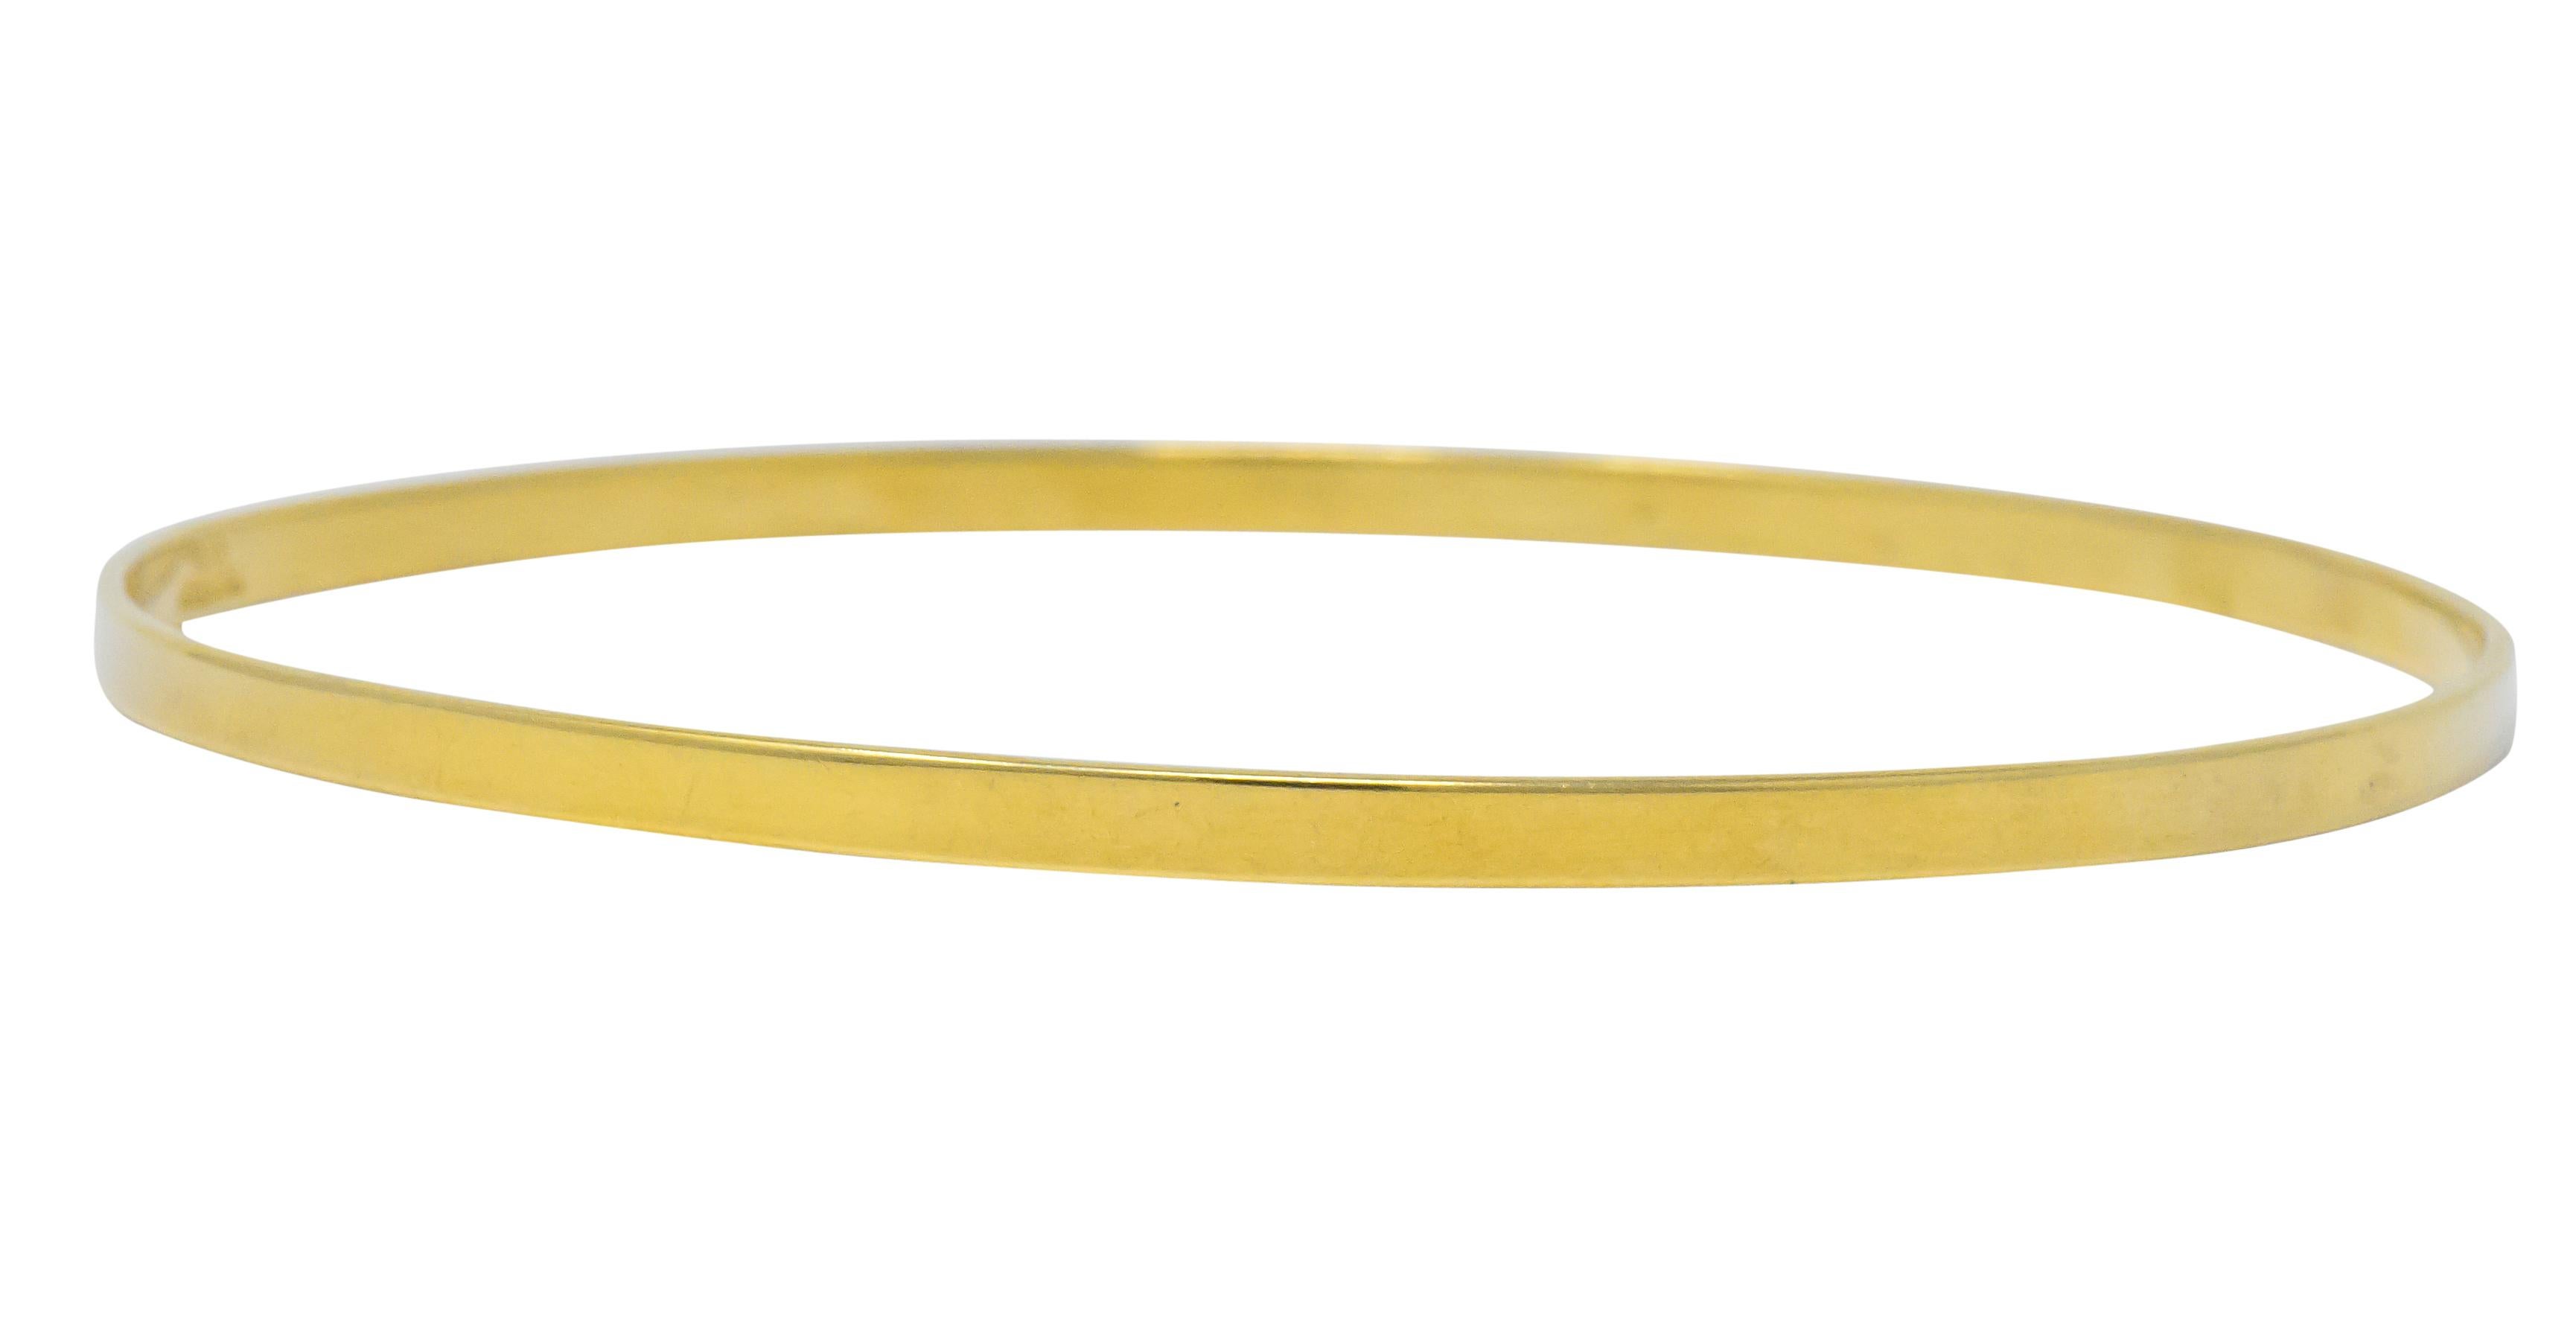 Smooth high polished gold bangle

Fully signed Tiffany & Co. and stamped 14K

Inner Circumference: 7 3/4 inches

Width Measures: 1/8 inch

Total Weight: 6.5 grams

Dignified. Stylish. Graceful.
 
Stock Number: We- 2660